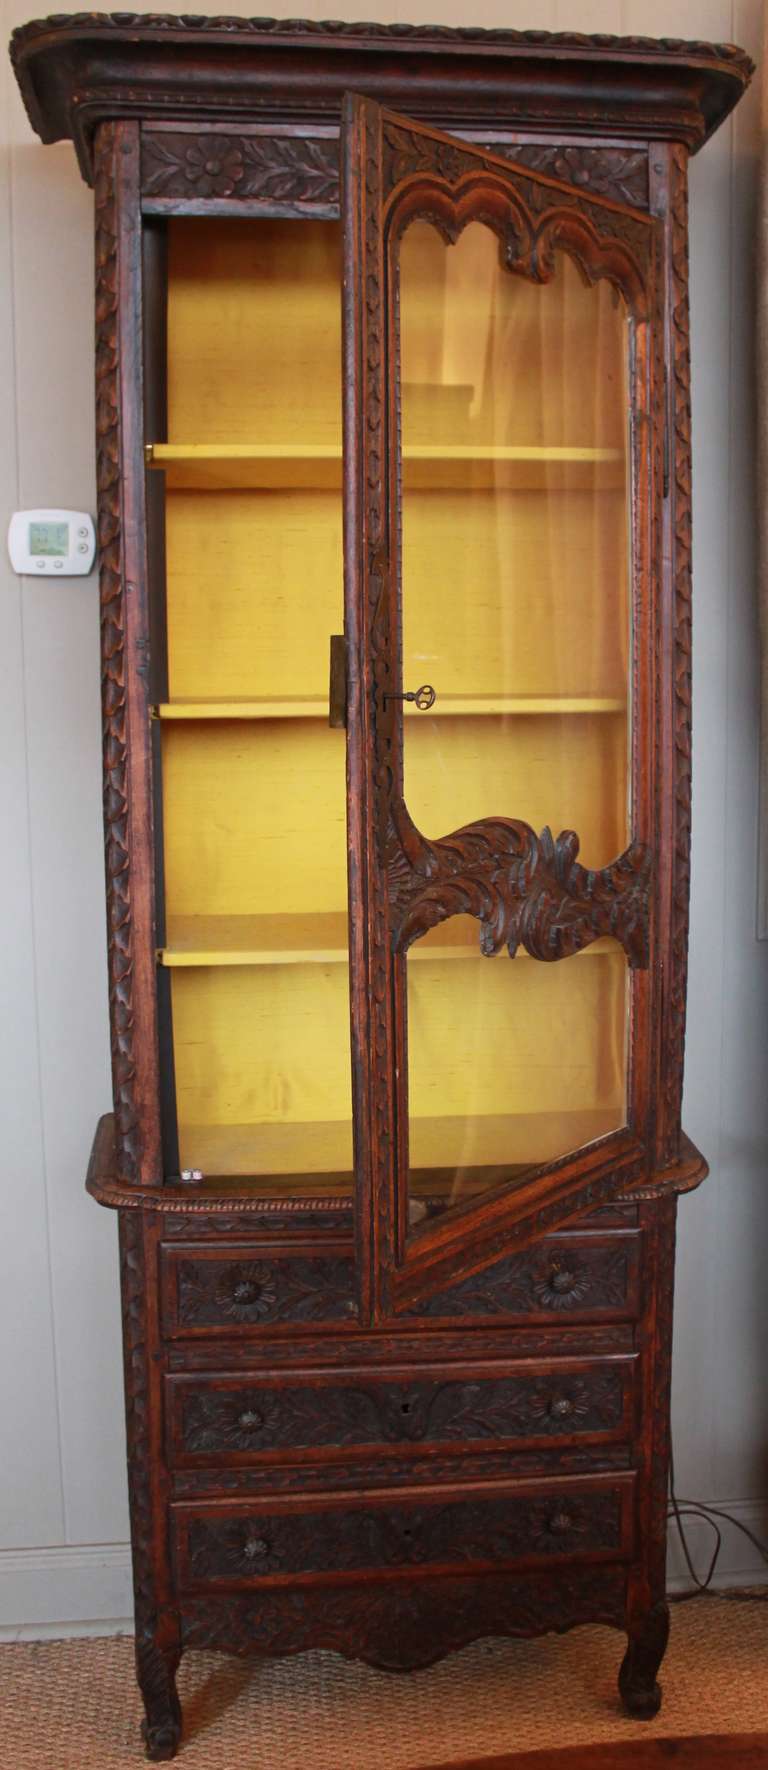 Wonderfully carved cabinet from France. Top has cabinet door with shelves that are lined with fabric. A light has been installed. Bottom has three drawers. This piece would work great in smaller spaces such as powder room, entry, hallways or